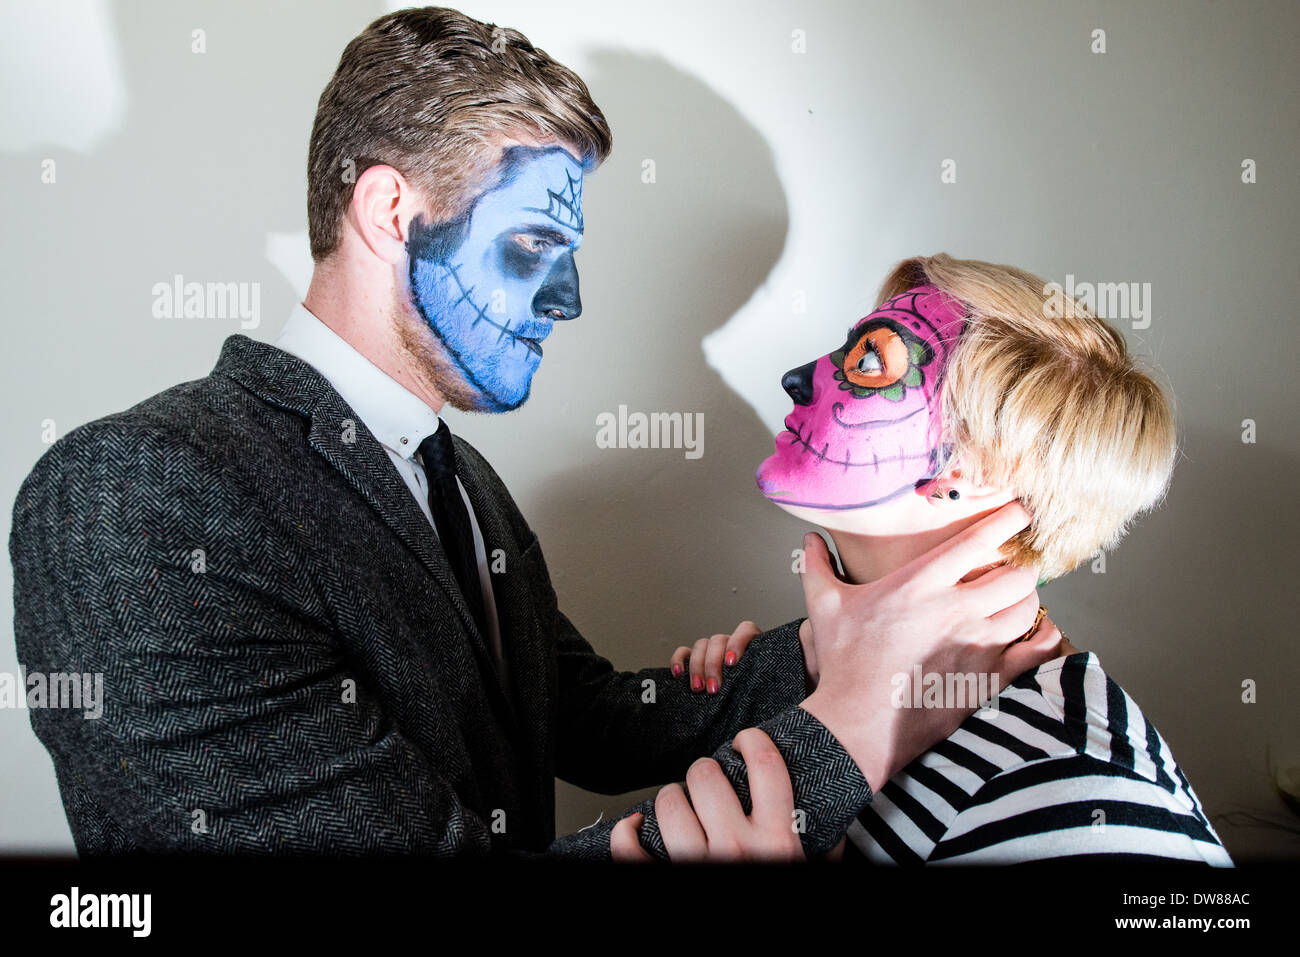 The man in an attractive young couple with horror style face paint pretends to strangle the woman, photographed on white. Stock Photo